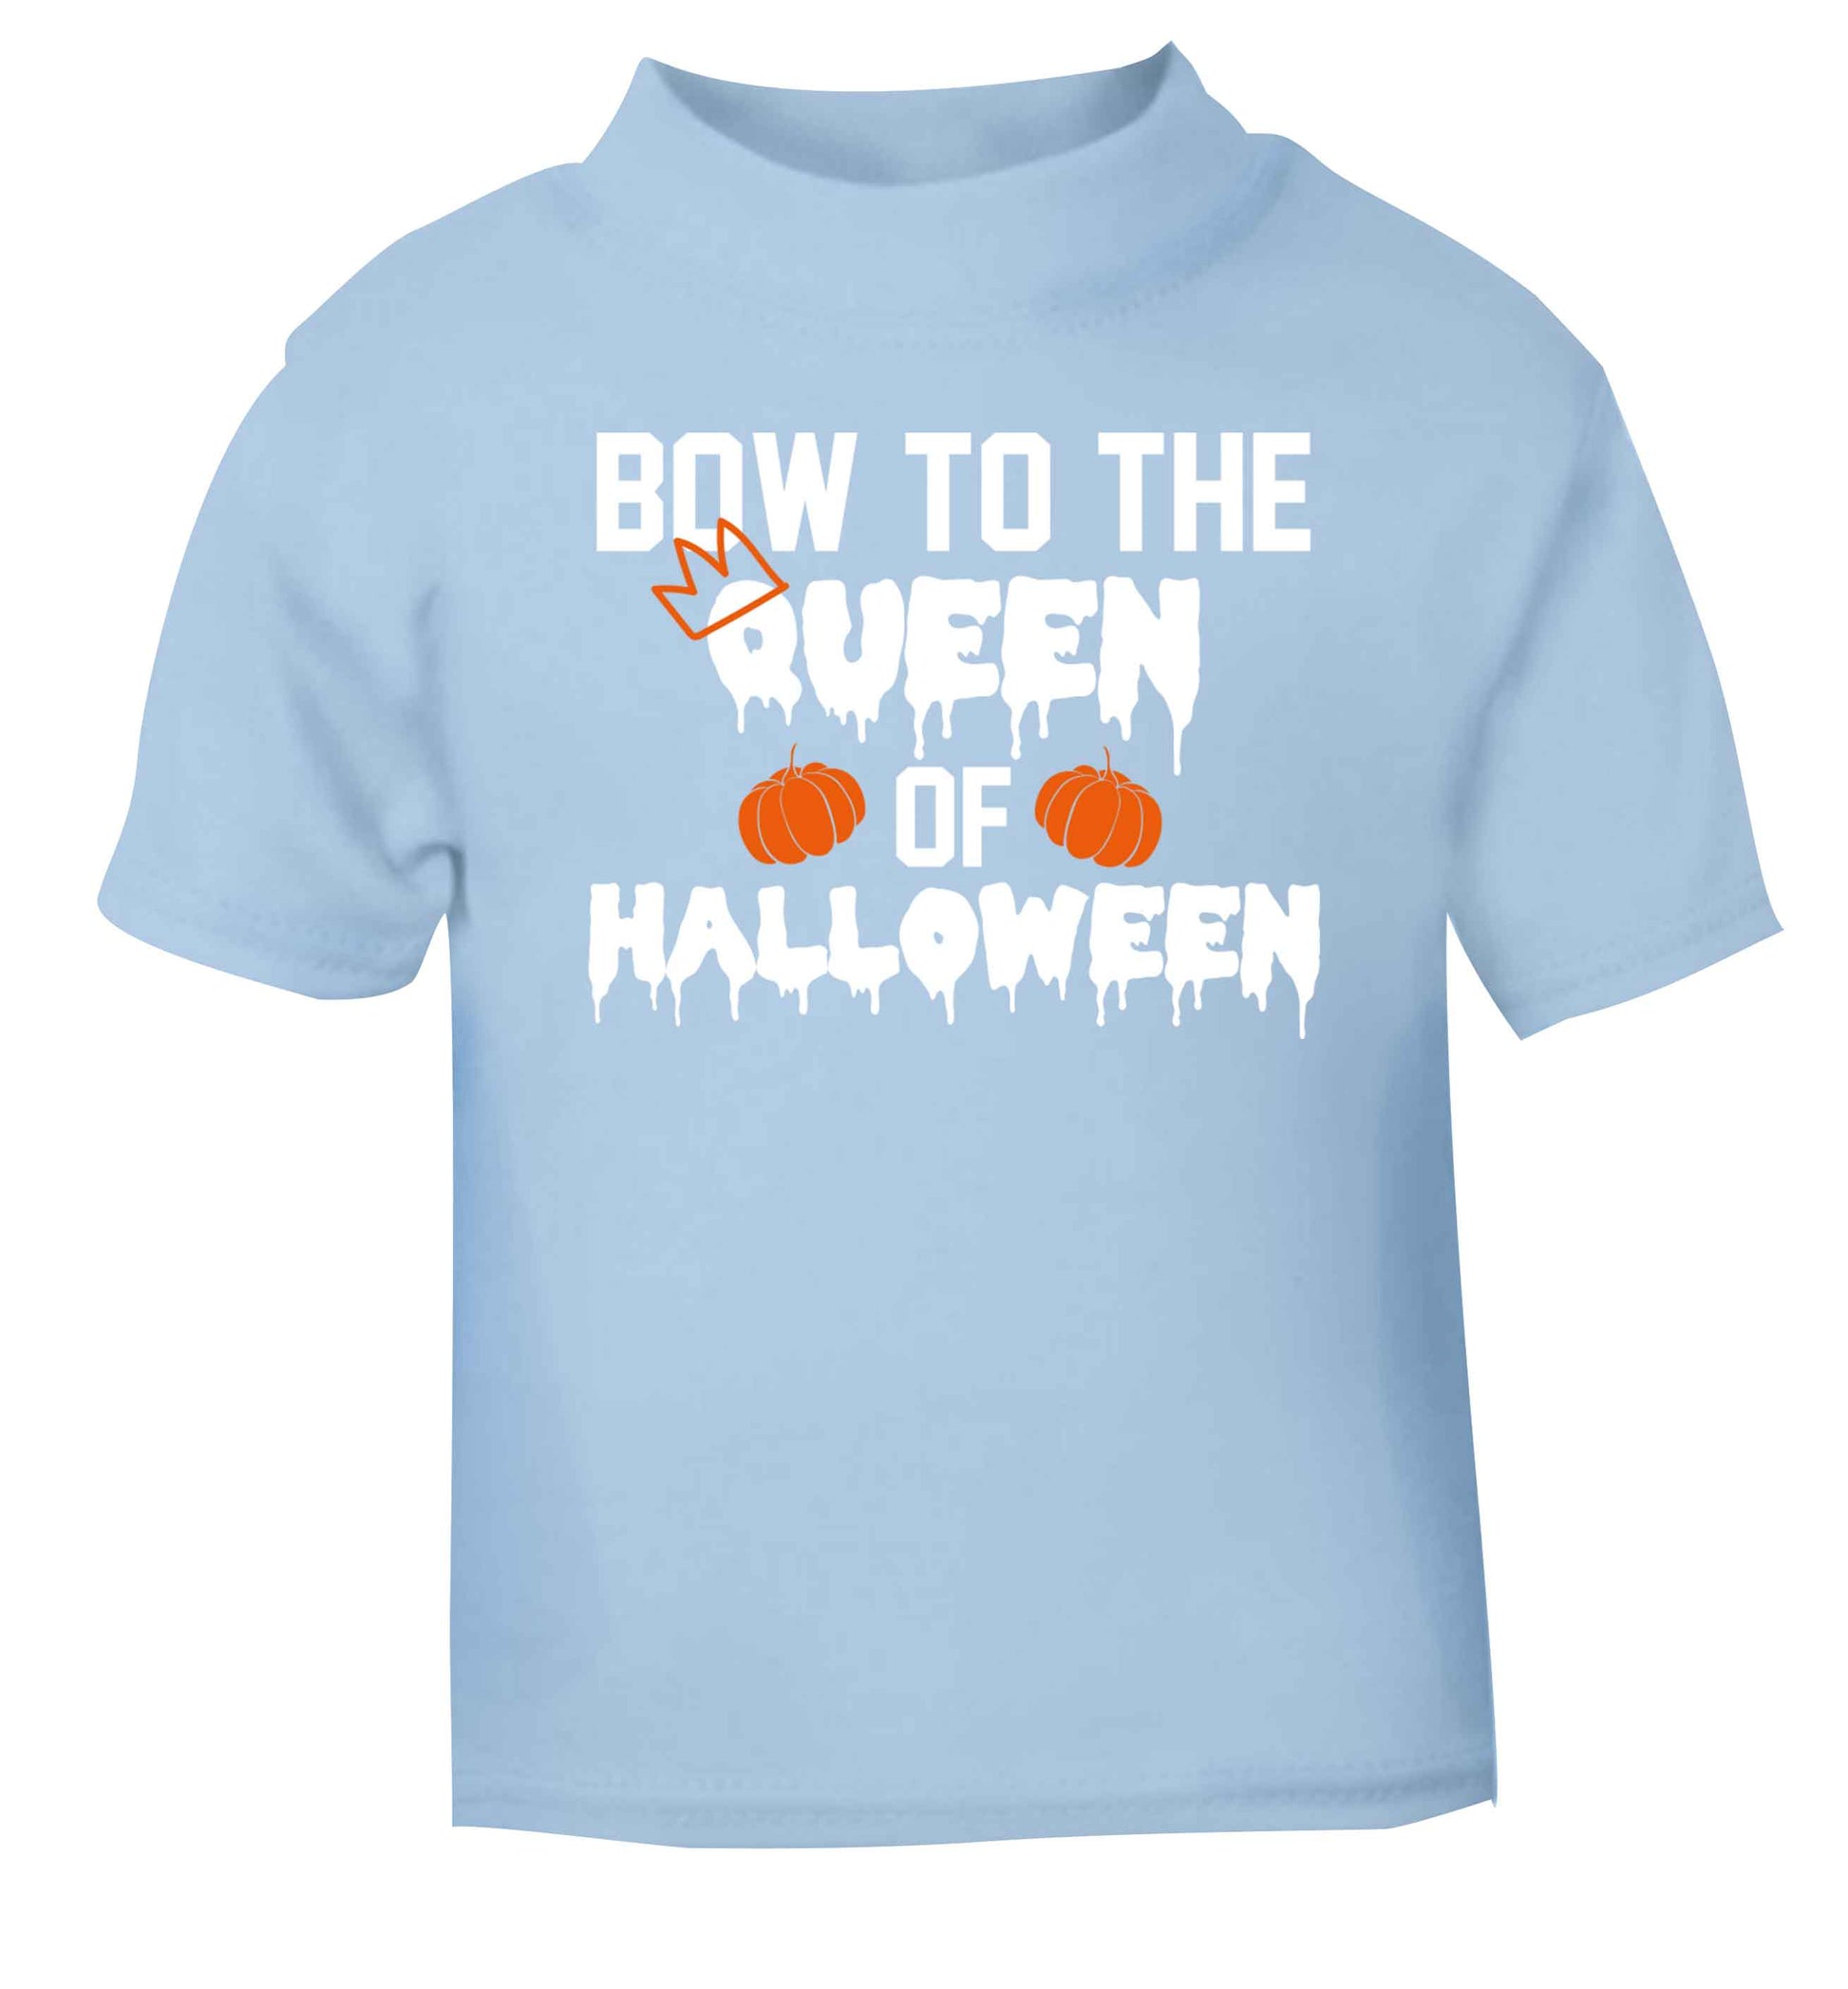 Bow to the Queen of halloween light blue baby toddler Tshirt 2 Years